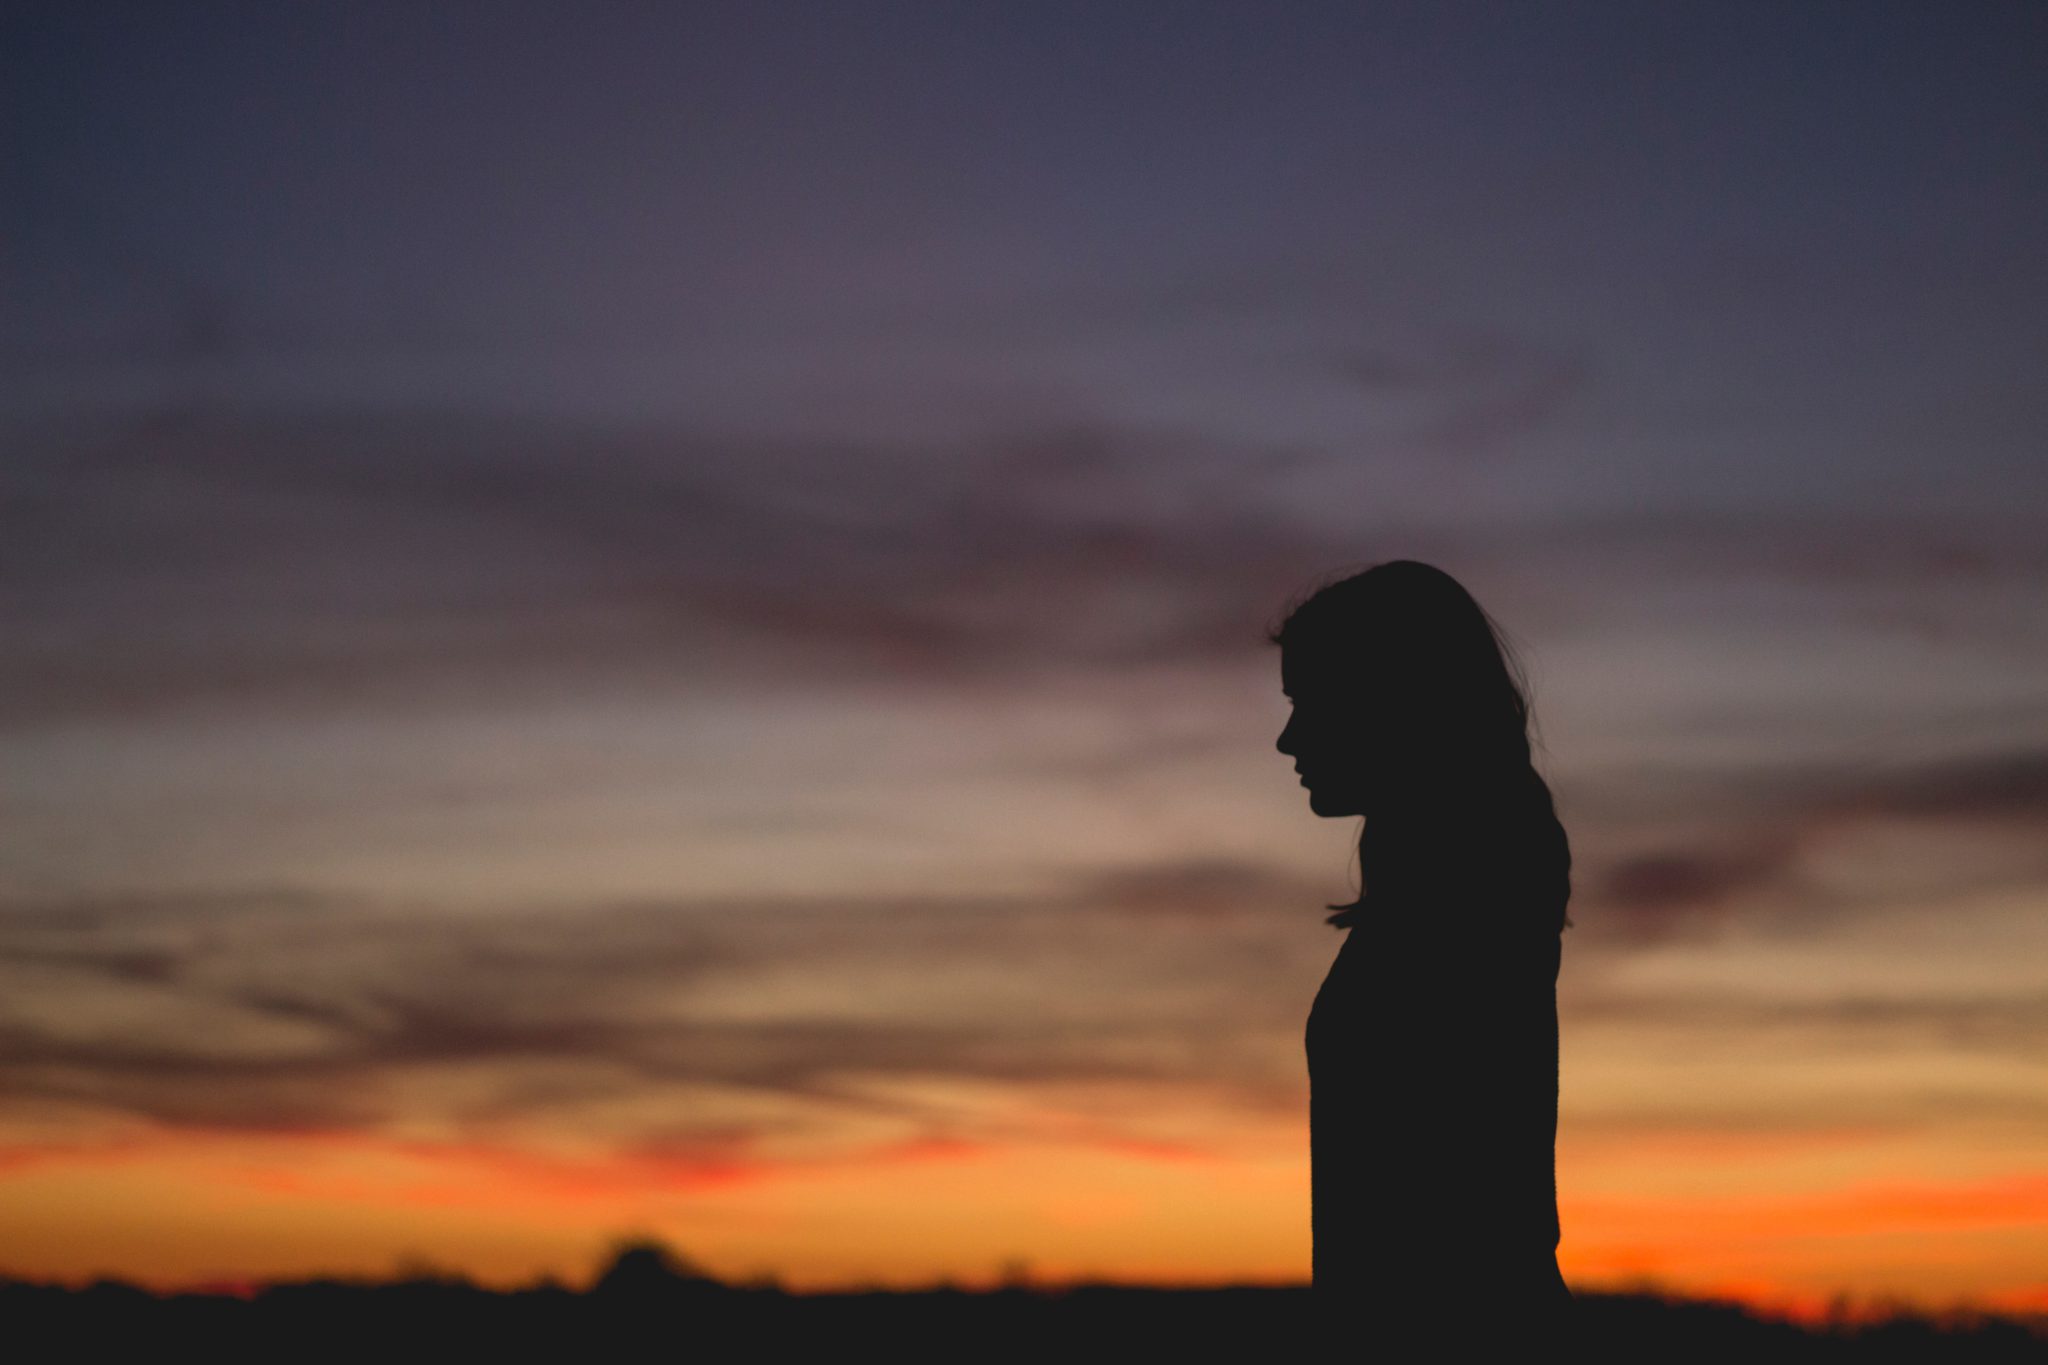 Representative image of the silhouette of a woman against a sunset